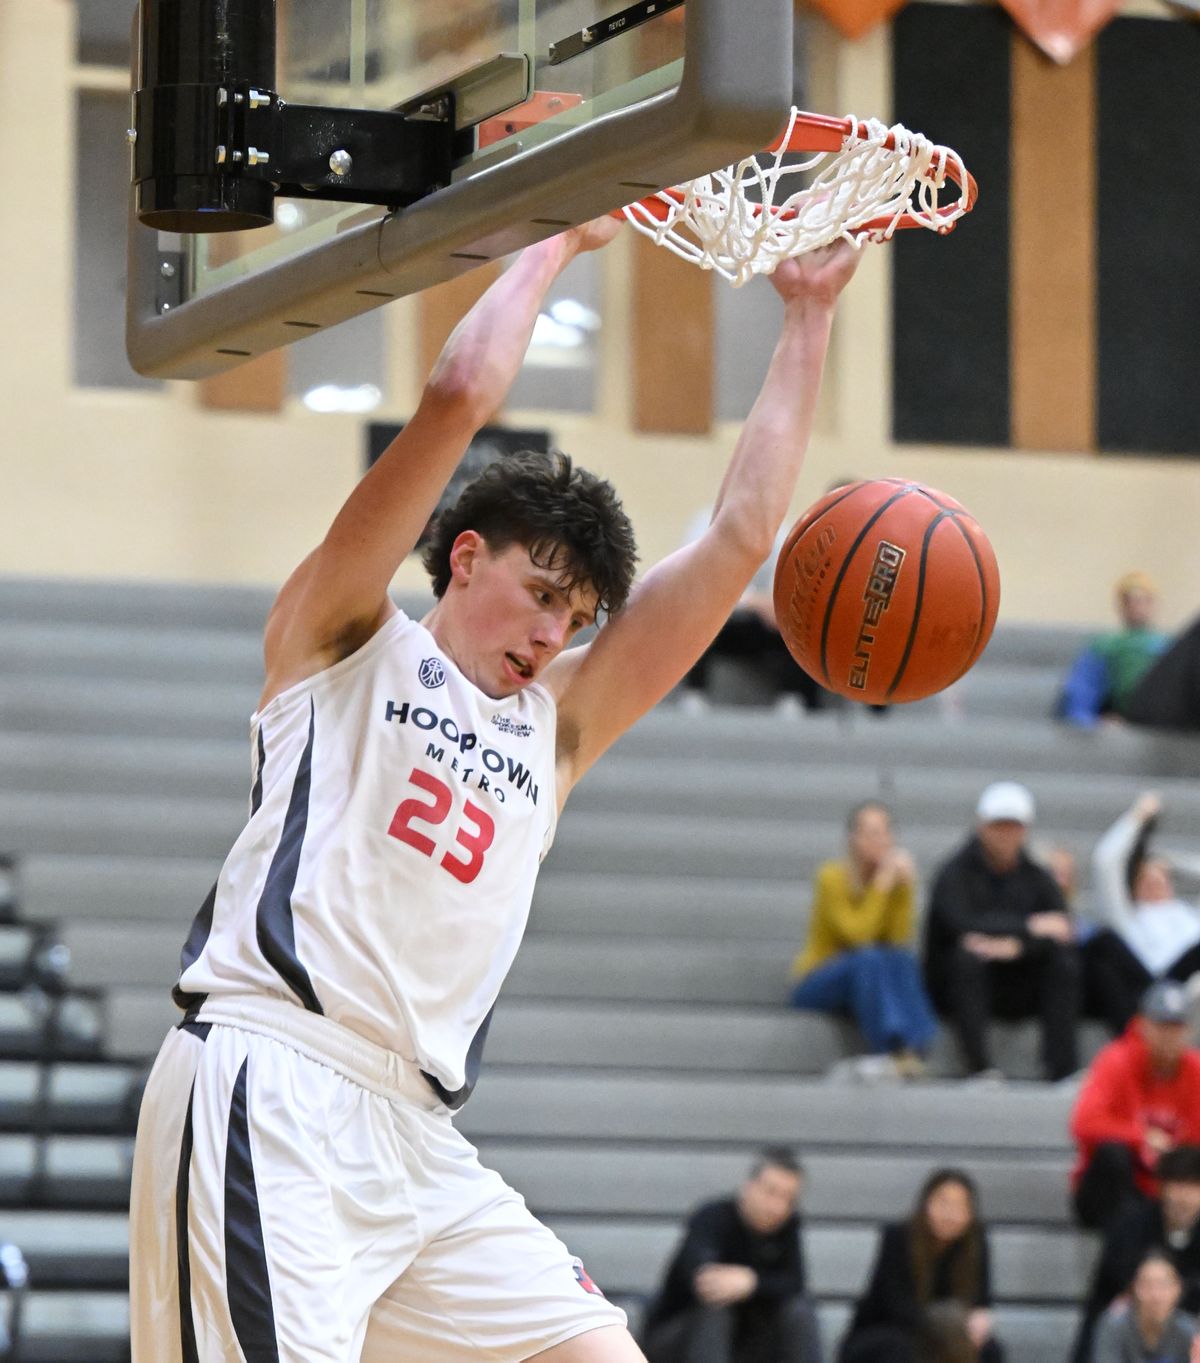 Metro forward Evan Stinson of Cheney dunks against Region during the Jack Blair Memorial on Tuesday at Lewis and Clark High School.  (Colin Mulvany/The Spokesman-Revi)